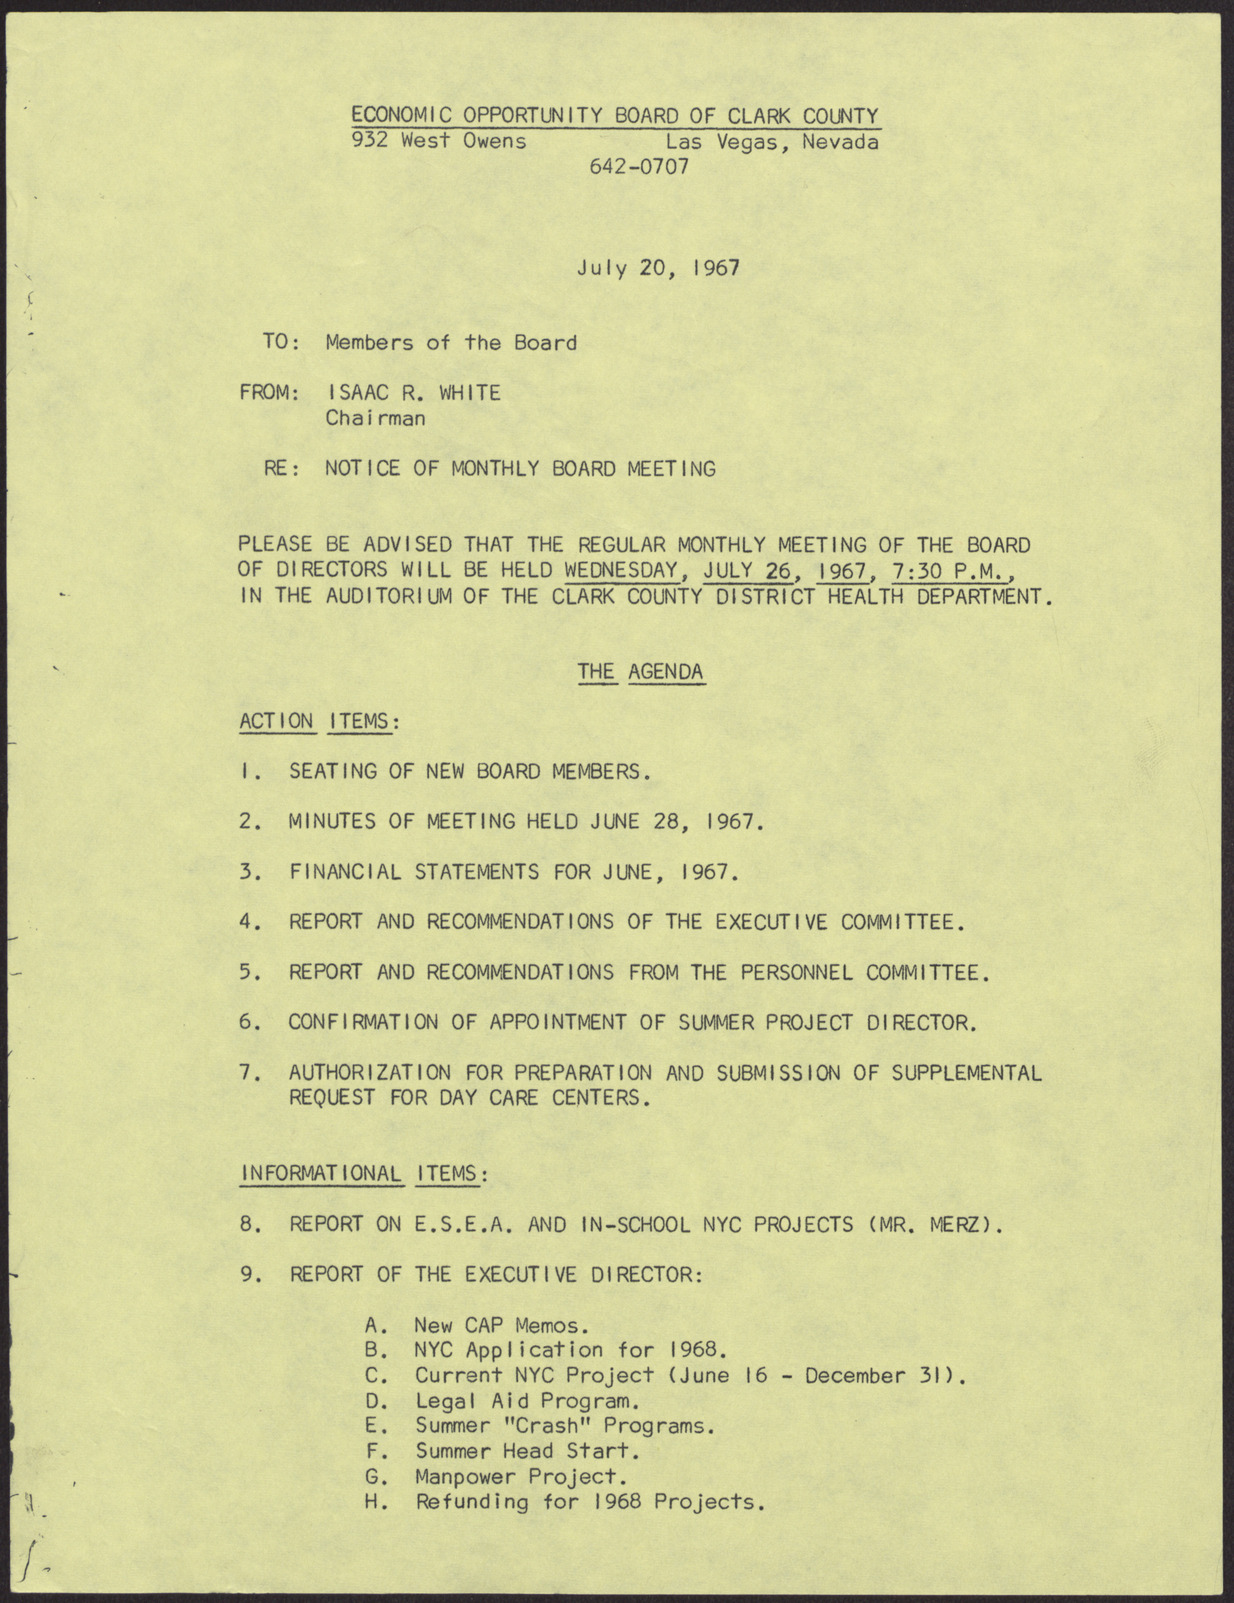 Notice to members of the Economic Opportunity Board of Clark County from Isaac R. White, July 20, 1967